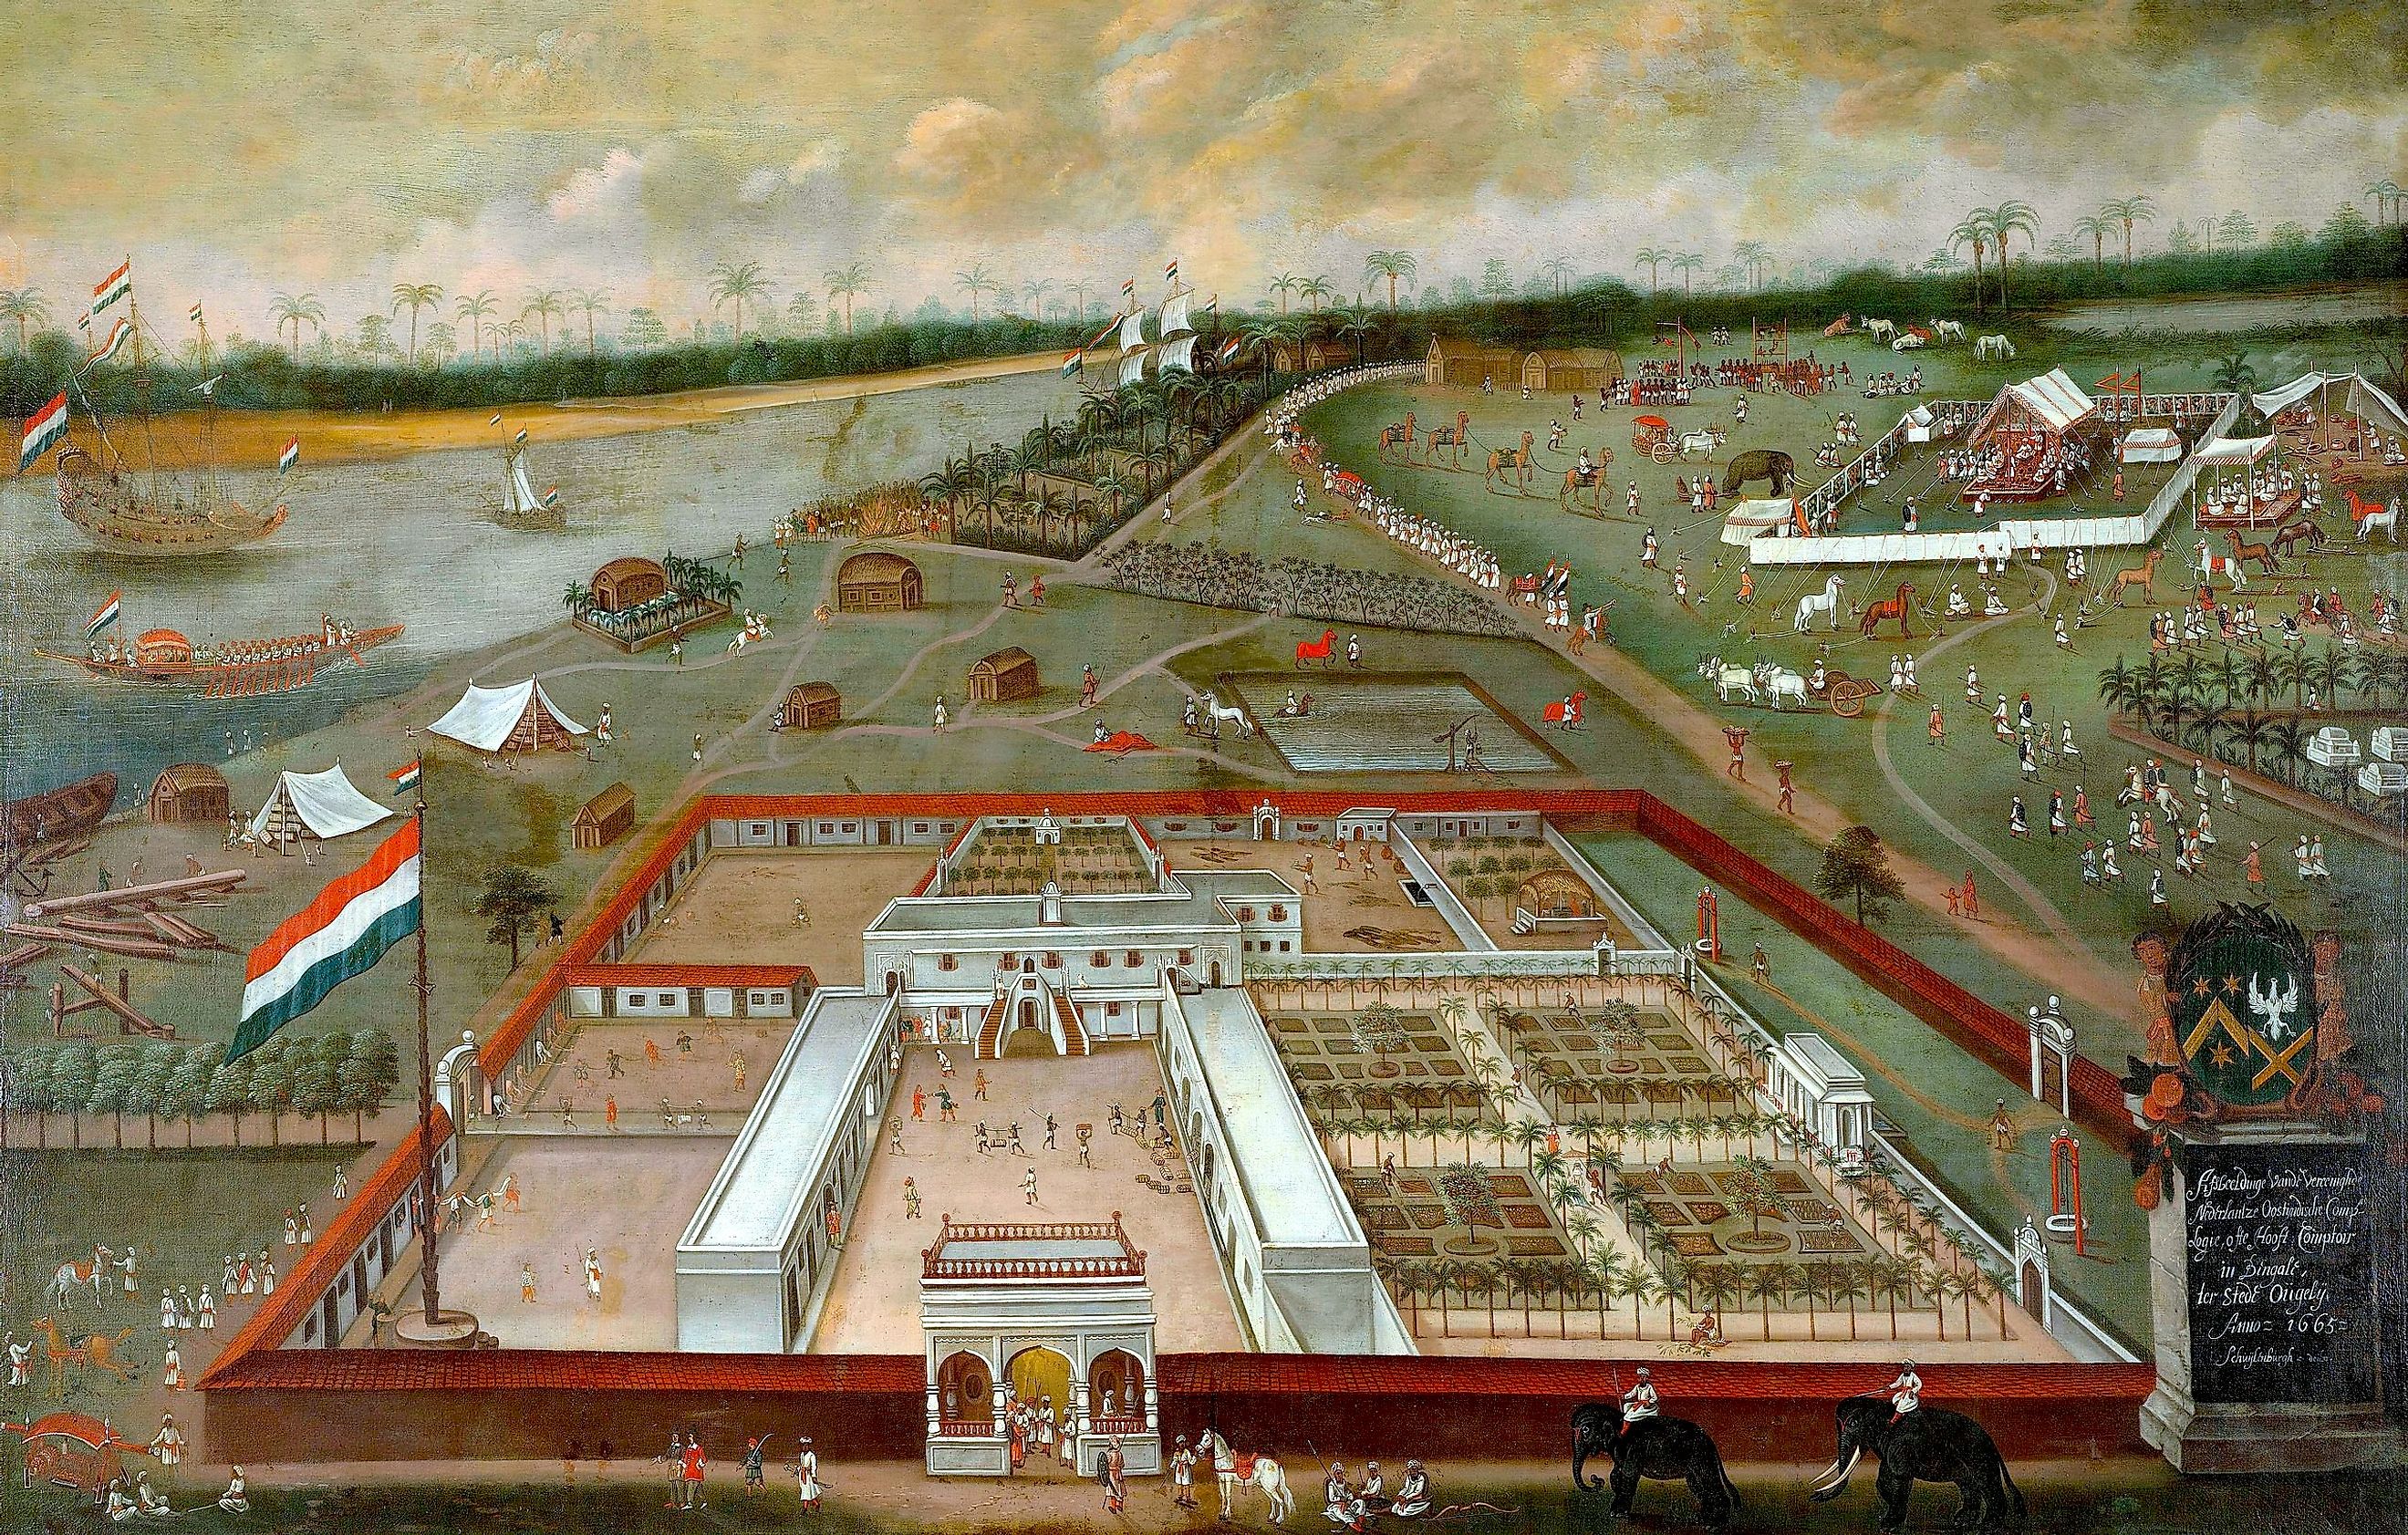 A factory entrepôt, a basic example of colonialism illustrating its different elements, hierarchies and impact to the land and people (the Dutch V.O.C. factory in Hugli-Chuchura, Bengal, in 1665).